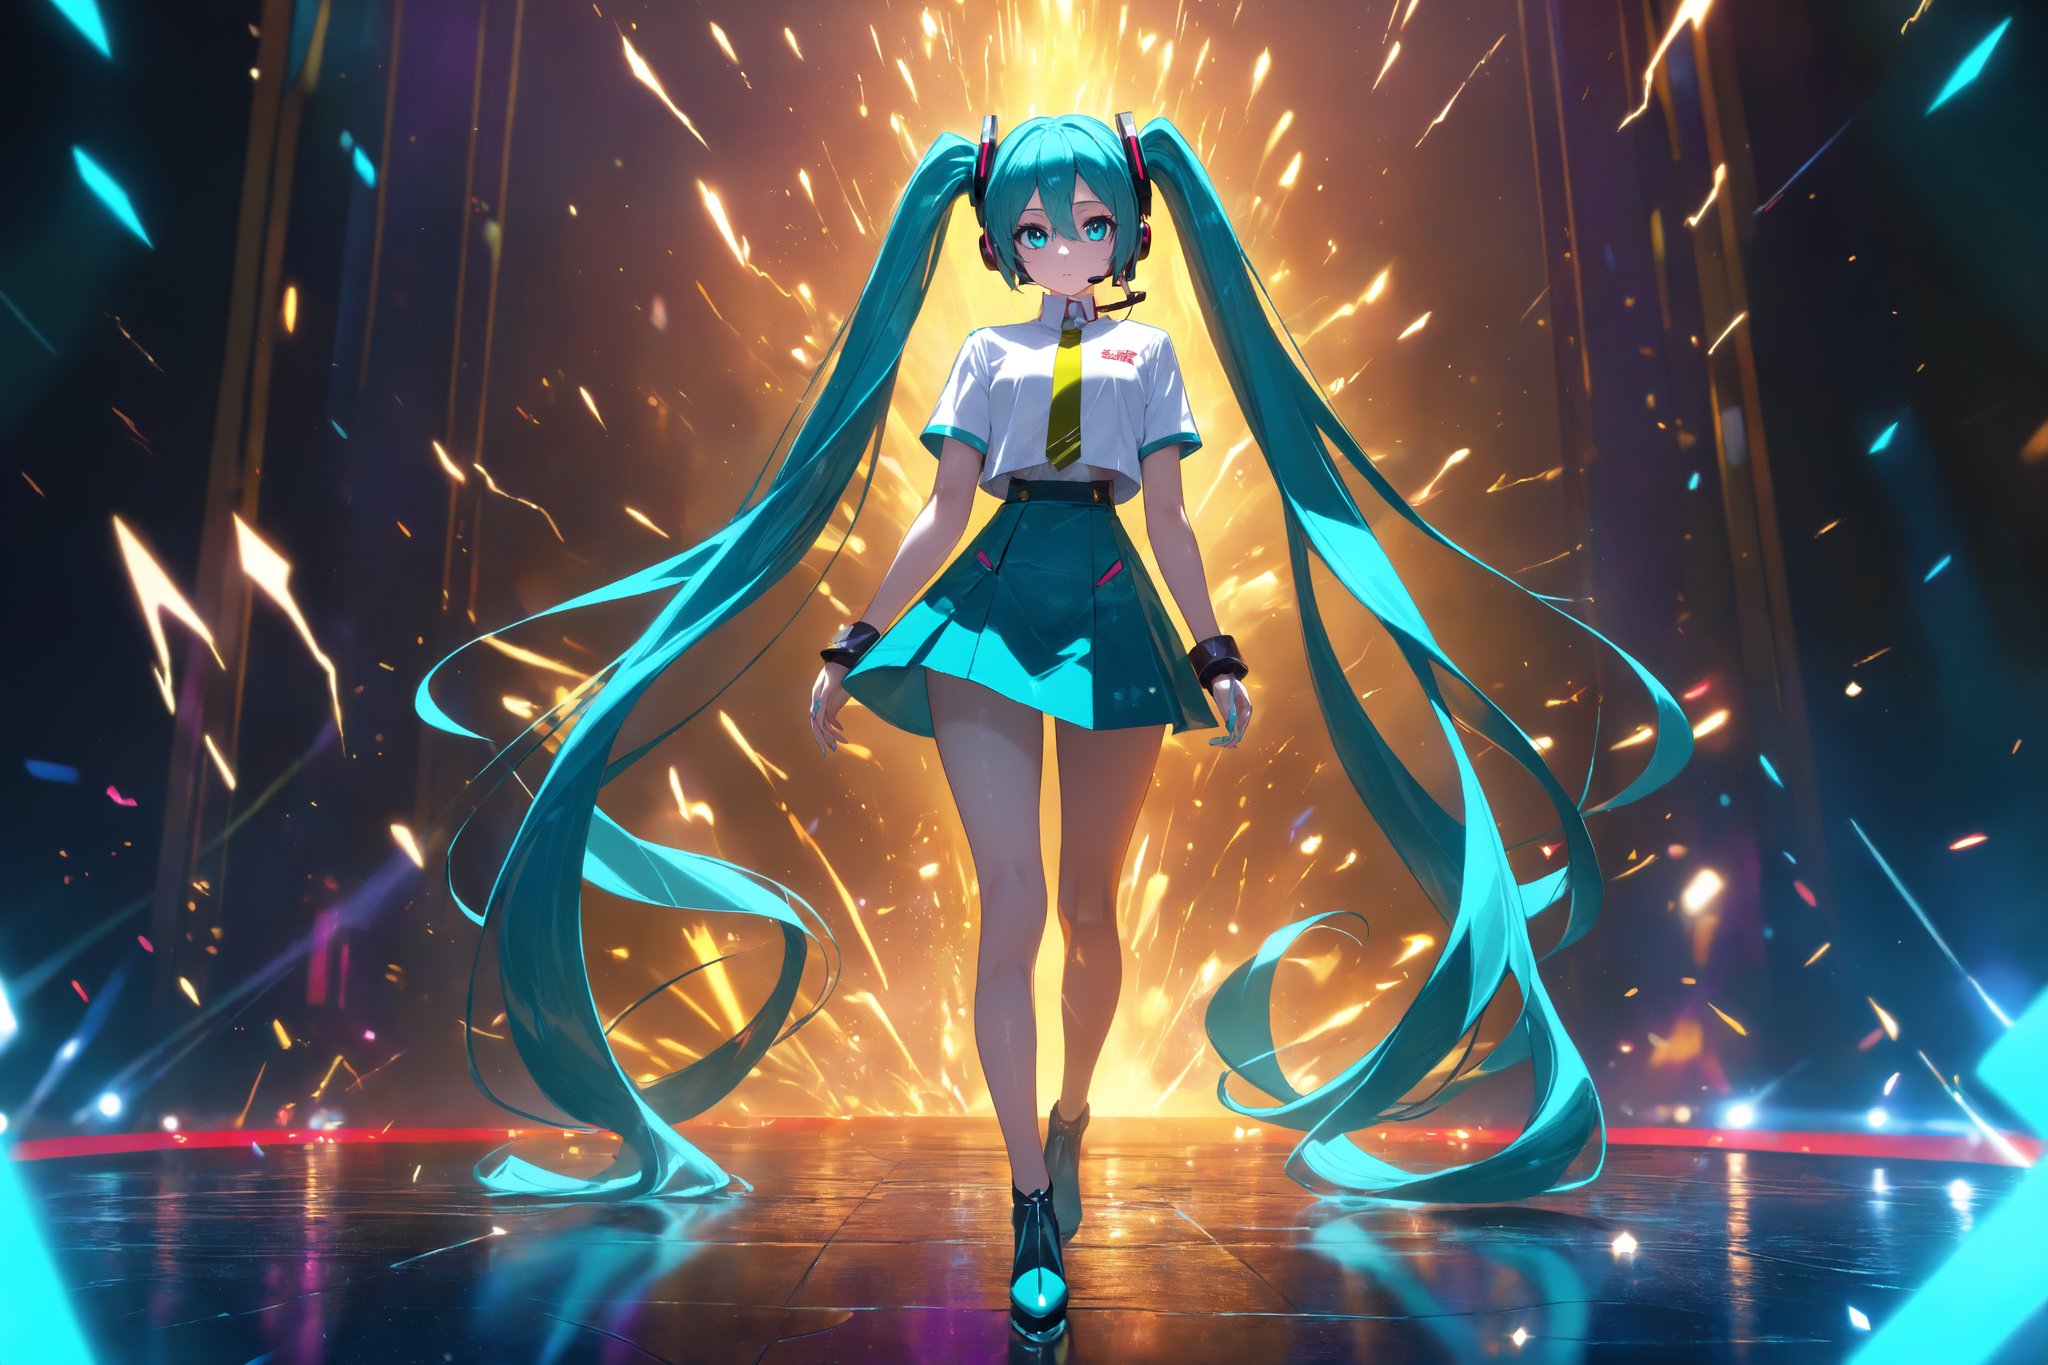 SCORE_9, SCORE_8_UP, SCORE_7_UP, SCORE_6_UP,

MASTERPIECE, BEST QUALITY, HIGH QUALITY, 
HIGHRES, ABSURDRES, PERFECT COMPOSITION,
INTRICATE DETAILS, ULTRA-DETAILED,
PERFECT FACE, PERFECT EYES,
NEWEST, 

Movie Poster page, (promotional poster), Hatsune Miku, 1female, solo, humanoid android, teal hair, teal eyes, singer's uniform, headset, WeirdOutfit style, concert, Nippon Budokan, glowneon, glowing, sparks, lightning, shadow minimalism, (best quality), (masterpiece), detailed, beautiful detailed eyes, perfect anatomy, perfect body, perfect face, perfect hair, perfect legs, perfect hands, perfect arms, perfect fingers, detailed hair, detailed face, detailed eyes, detailed clothes, detailed skin, ultra-detailed, (full body), (upper body), (top quality), pop art, extremely detailed, extremely detailed CG, (high resolution), highly detailed, (high quality), (perfect quality), (glitchcore colors), racingmiku2022